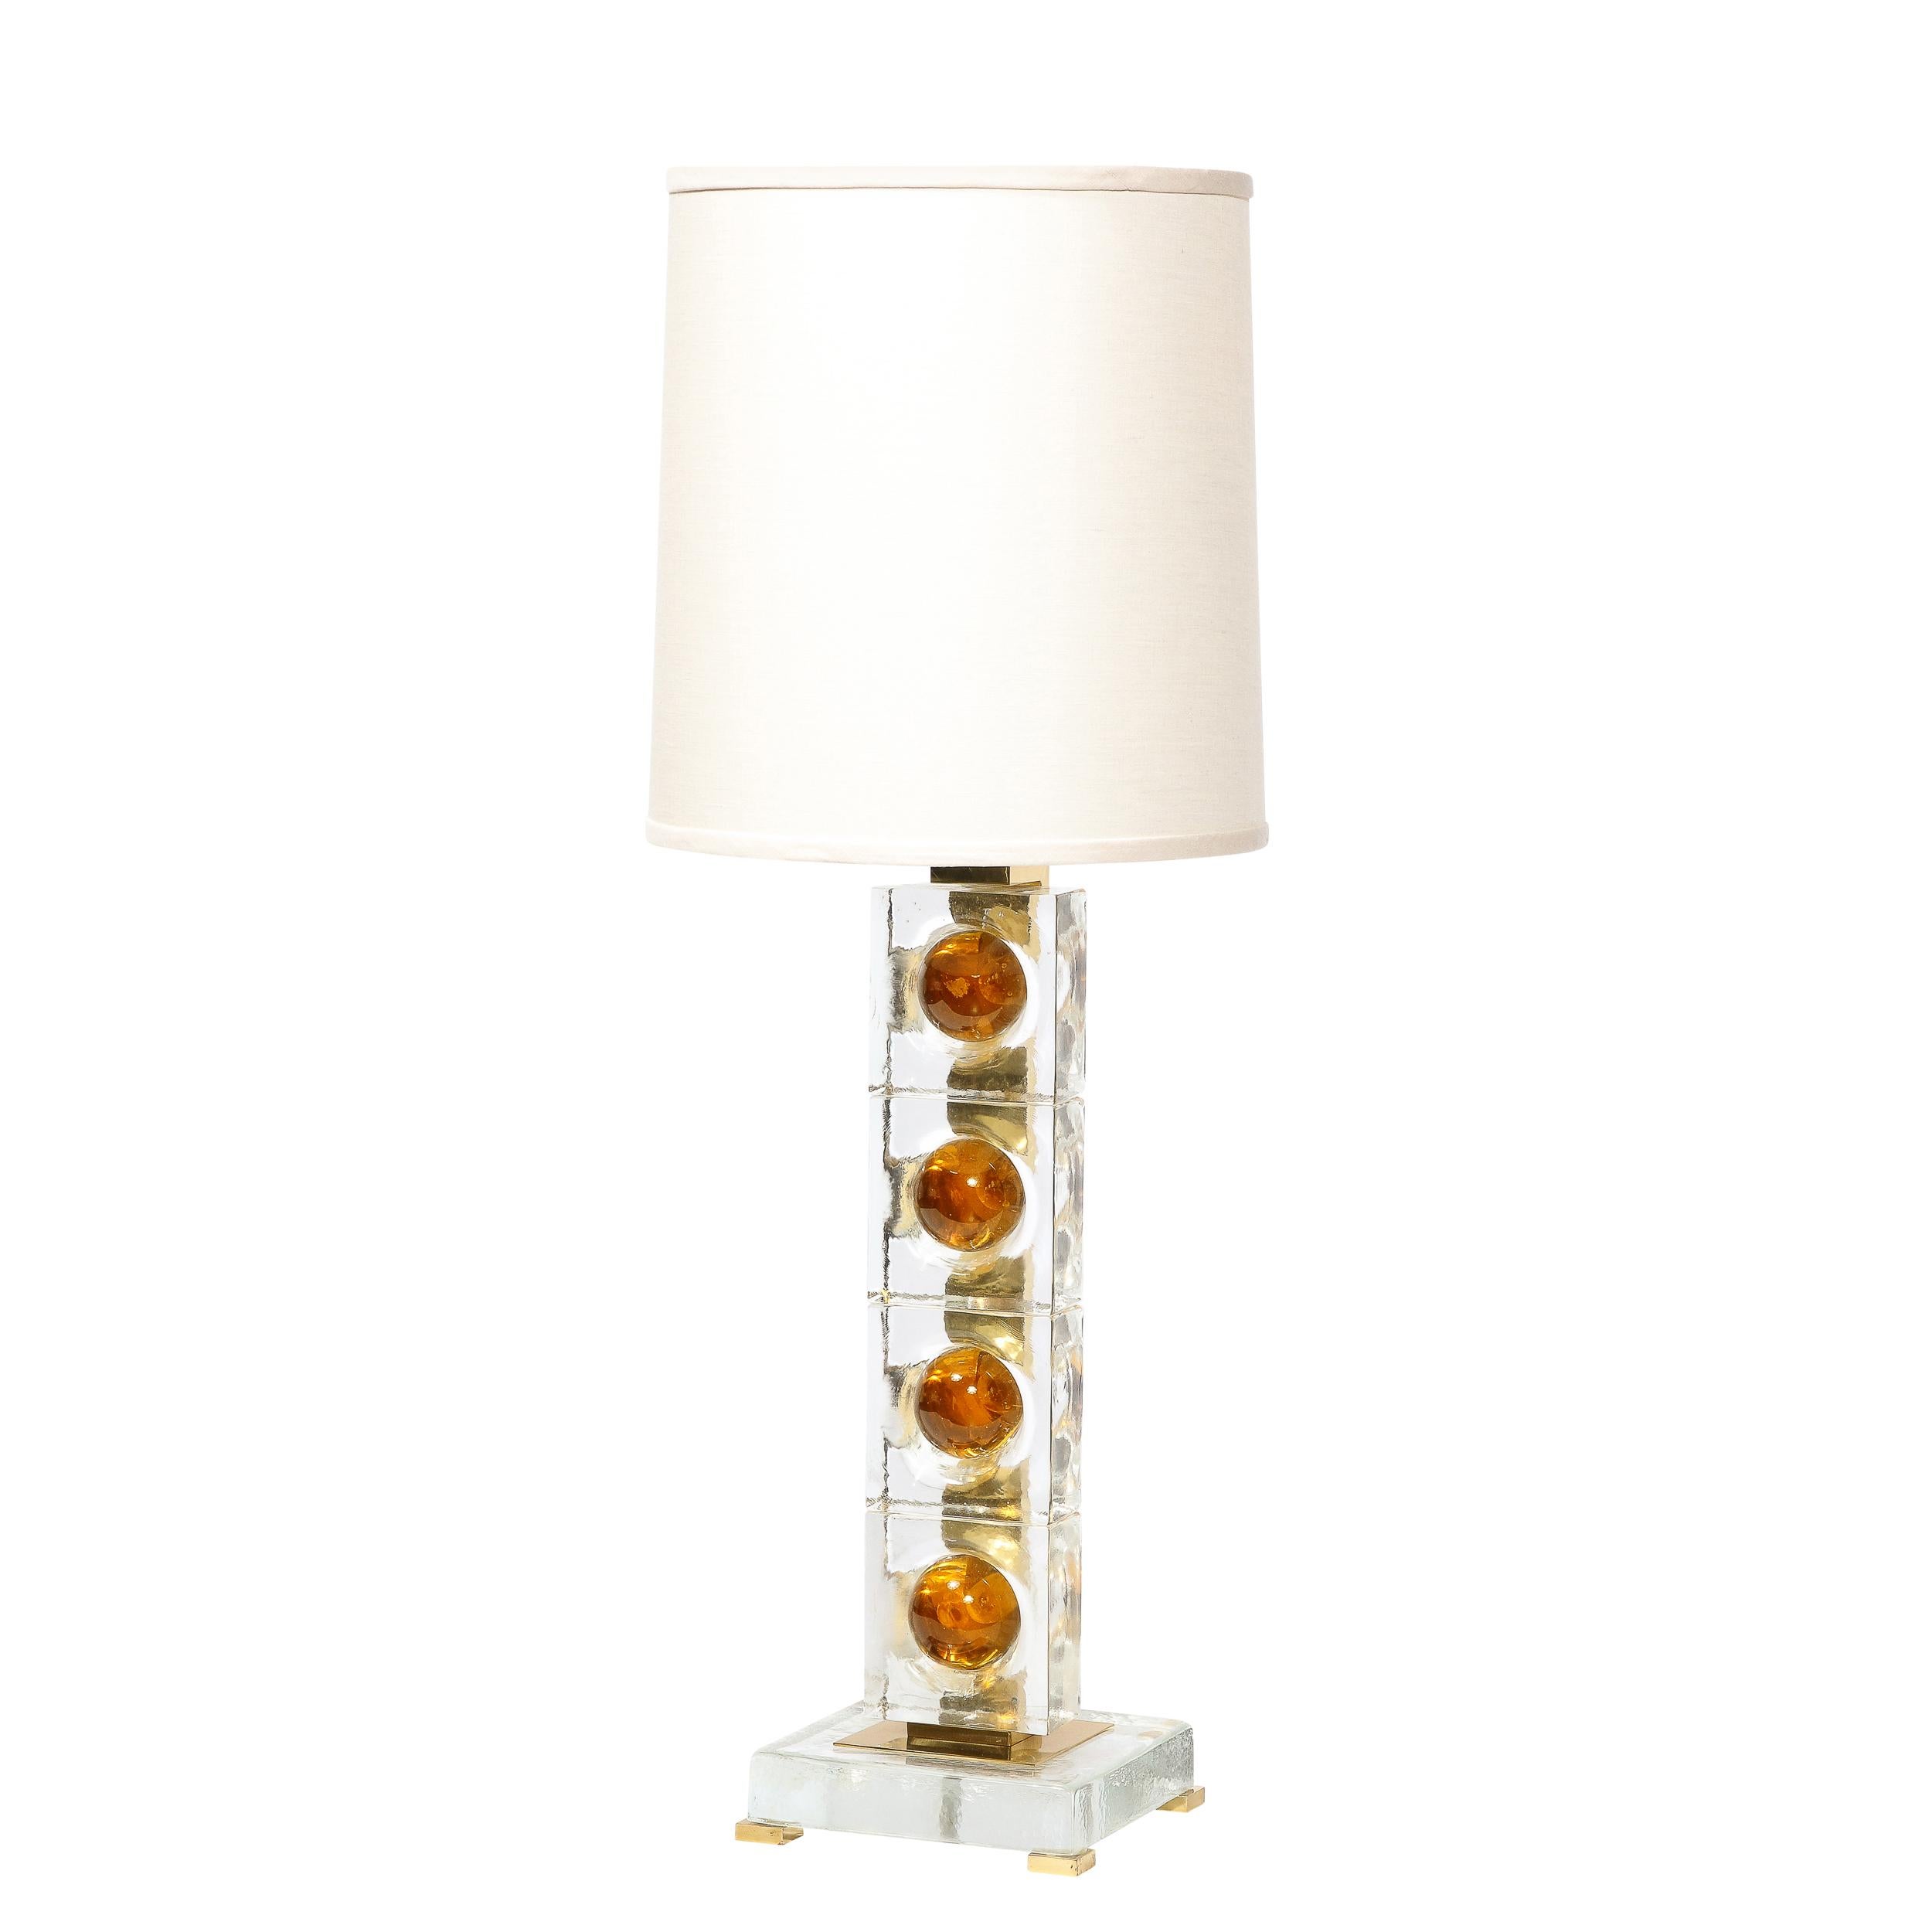 This stunning pair of modernist table lamps were hand blown in Murano, Italy- the island off the coast of Venice renowned for centuries for its superlative glass production- during the latter half of the 20th century. They feature volumetric